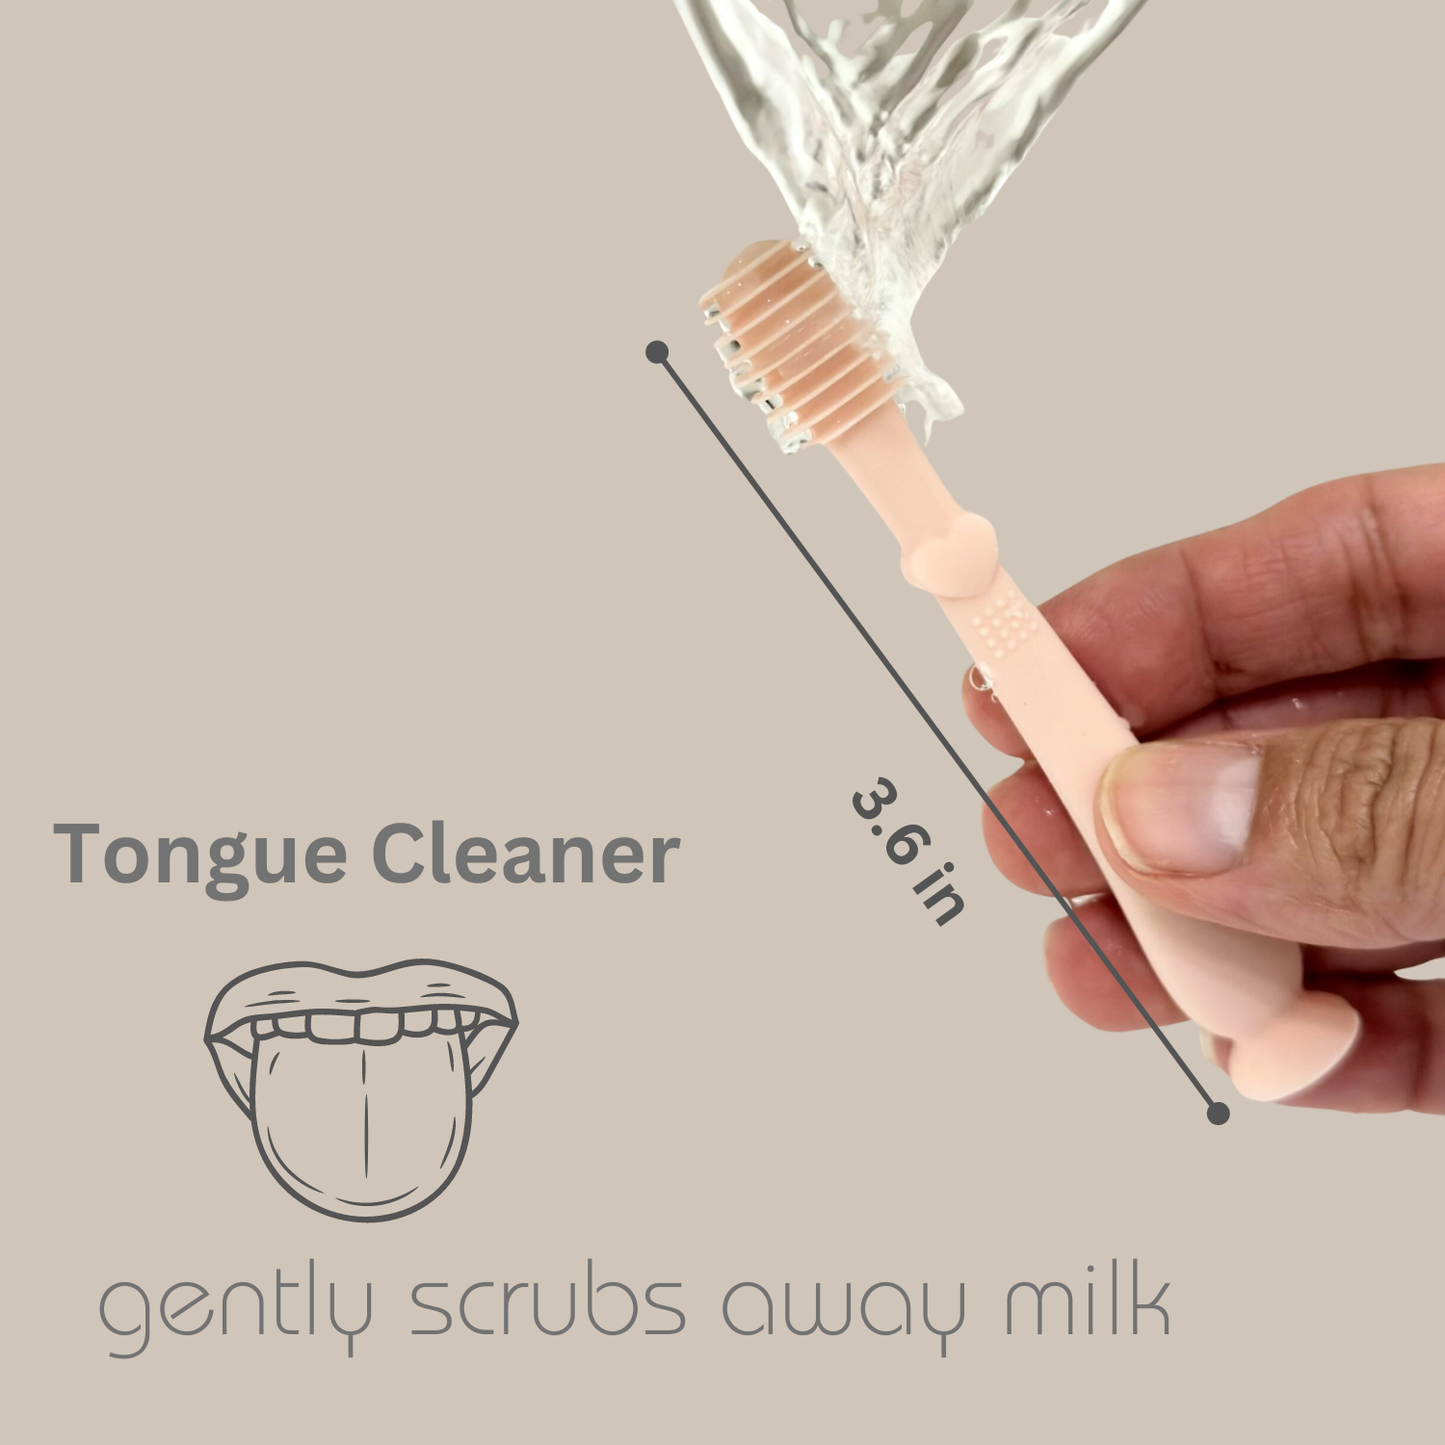 Baby Finger Toothbrush & Tongue Cleaner- 3m+